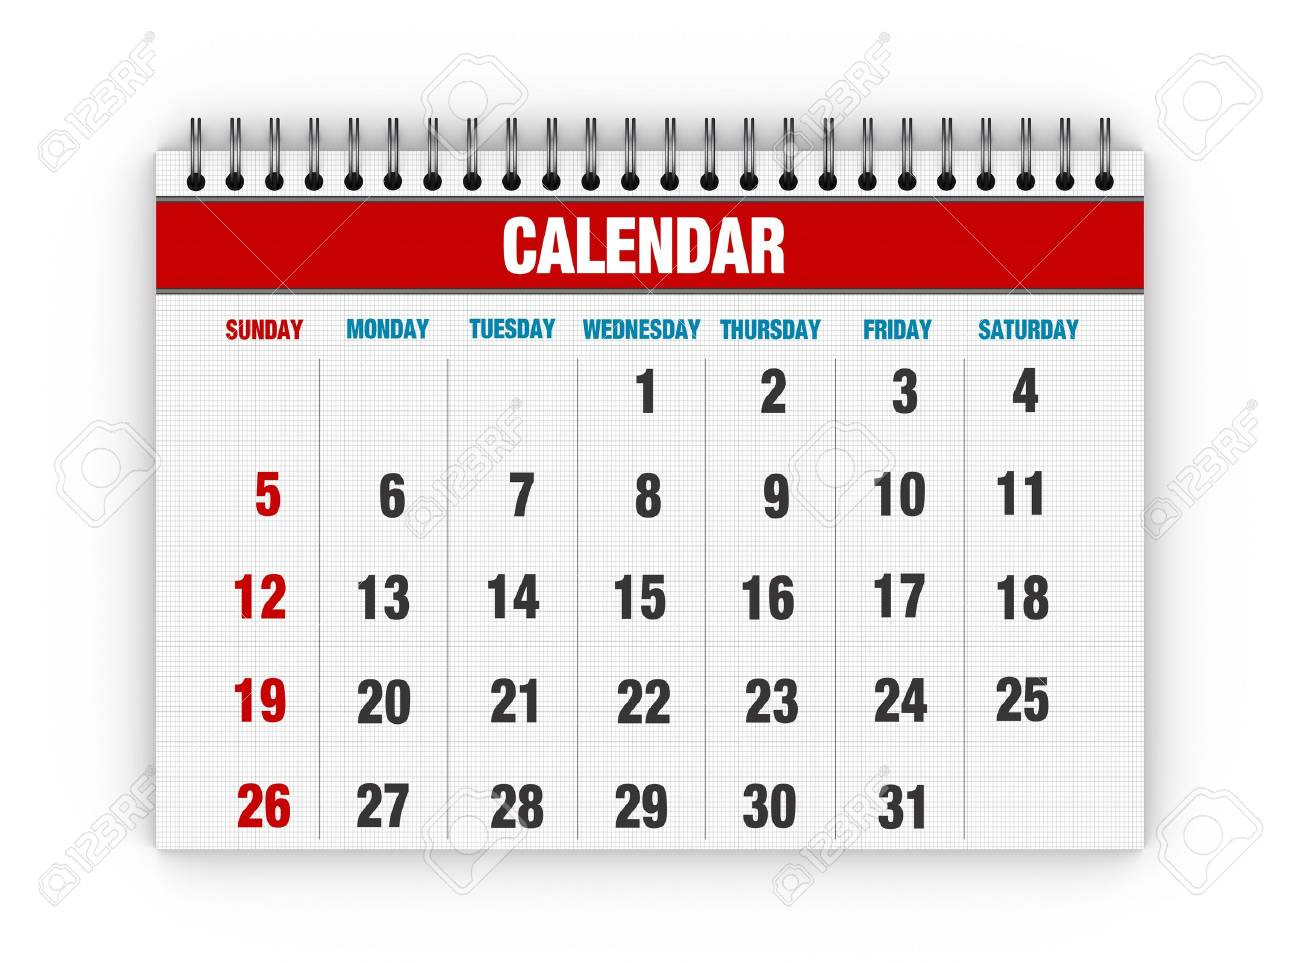 Red Calendar With Days Of Month Stock Photo, Picture And Royalty Free  Image. Image 21151361.